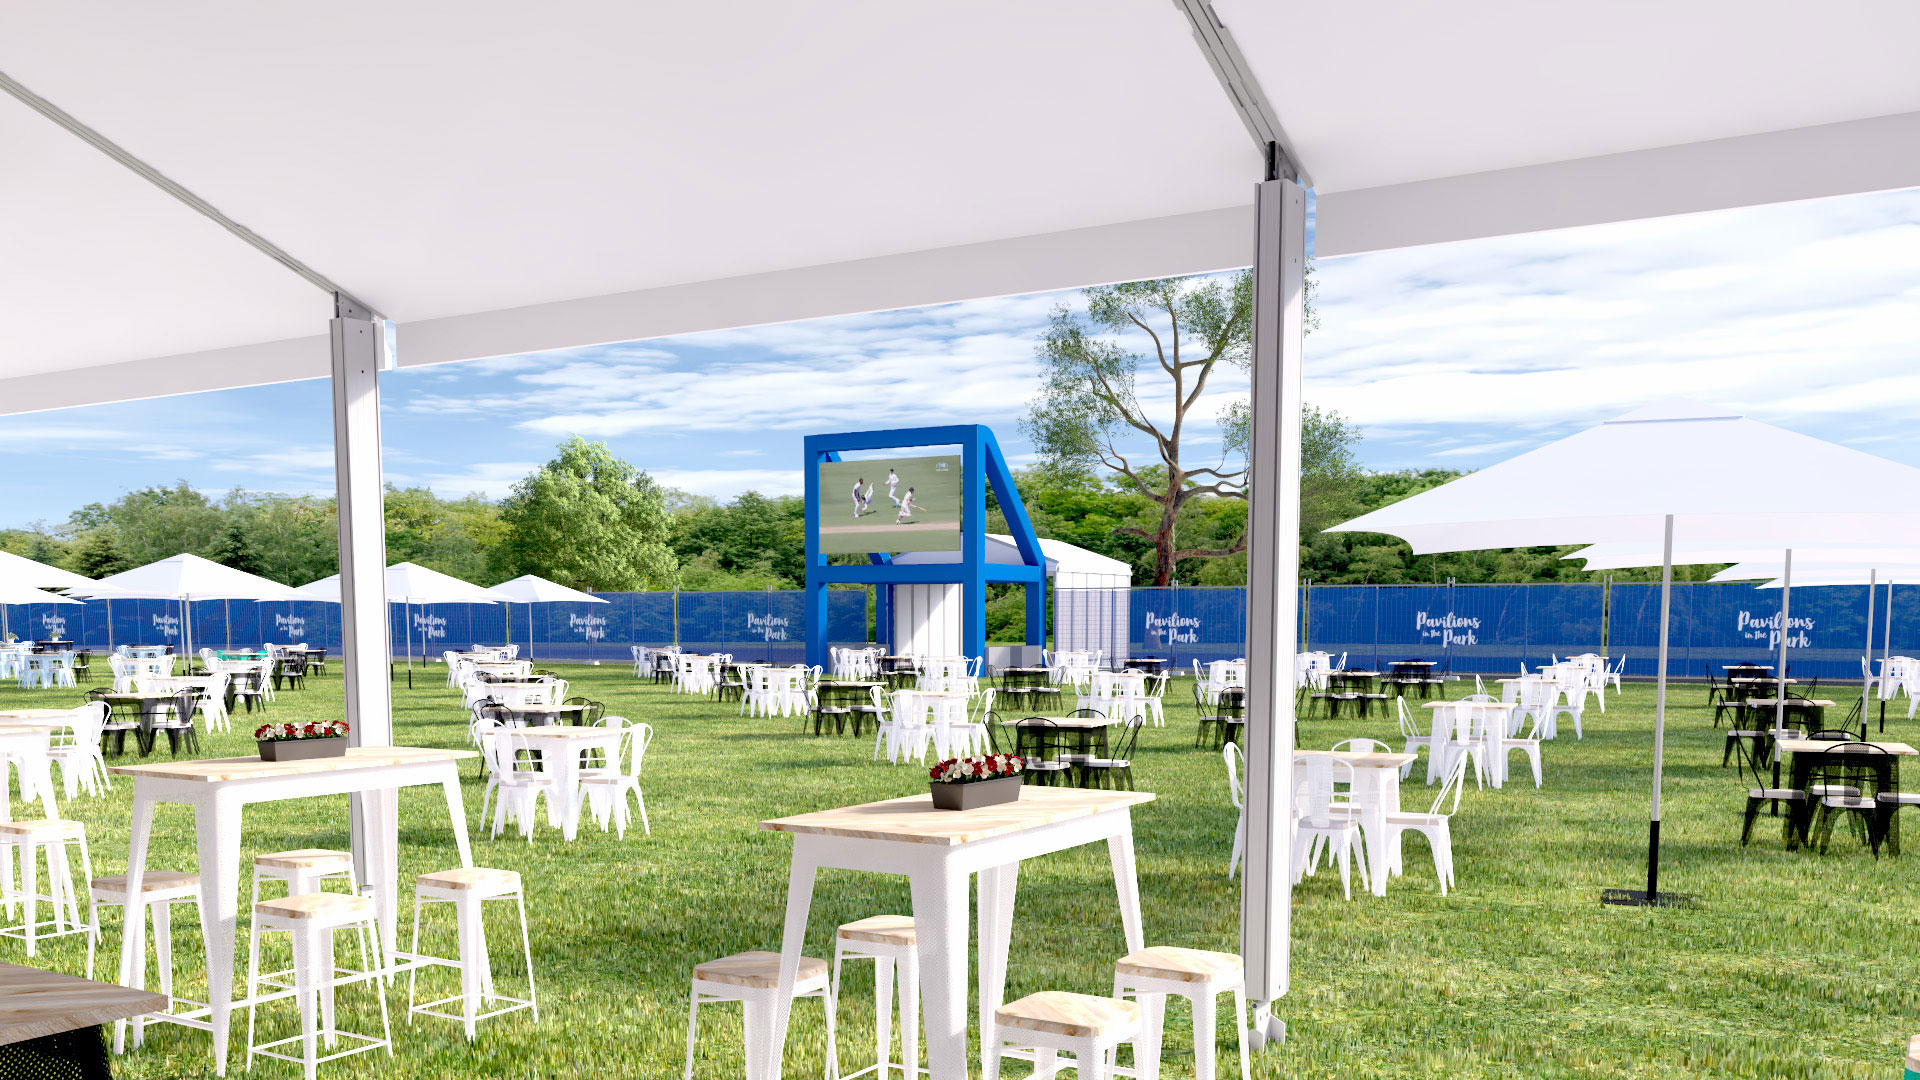 Pavilions in the Park: A hospitality area in Yarra Park for MCC members during the Boxing Day Test.